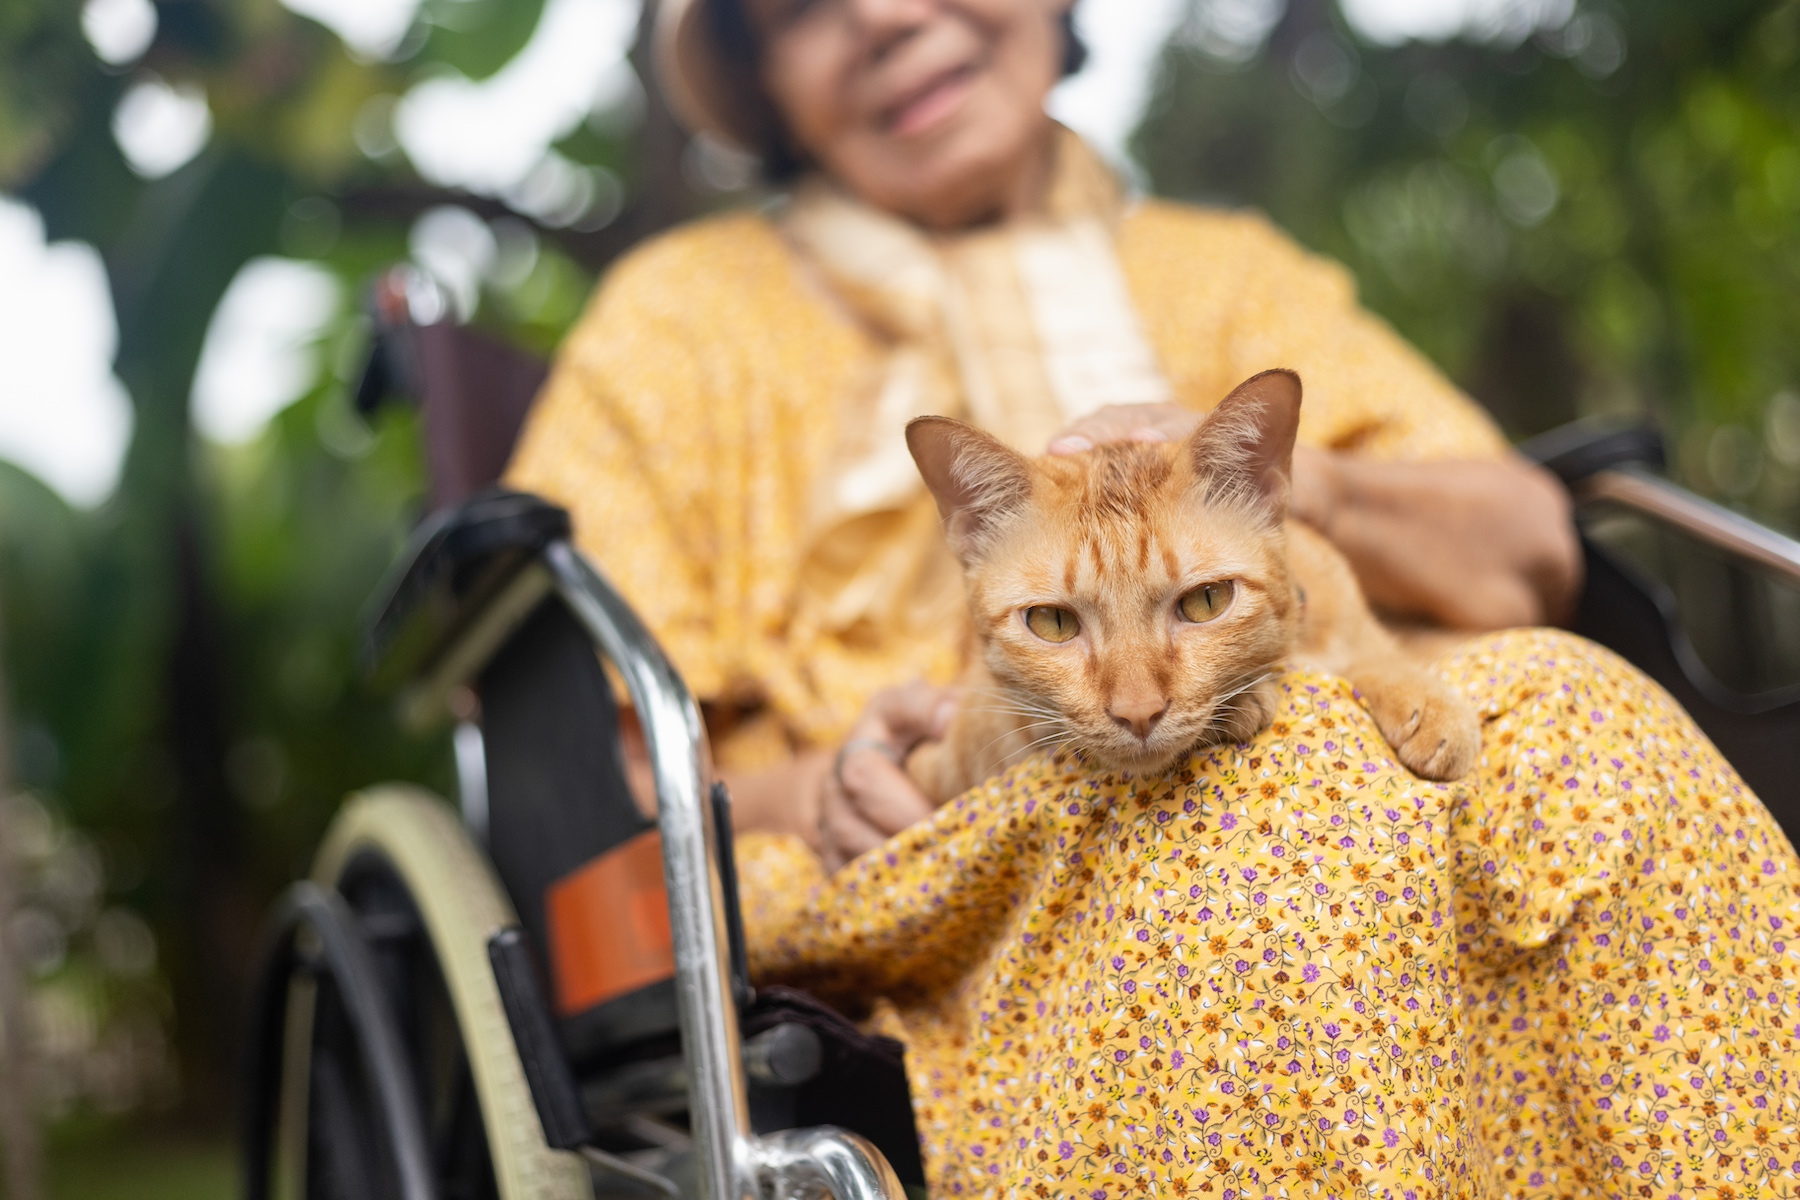 An older woman in a yellow dress sits in her wheelchair holding an orange cat in her lap